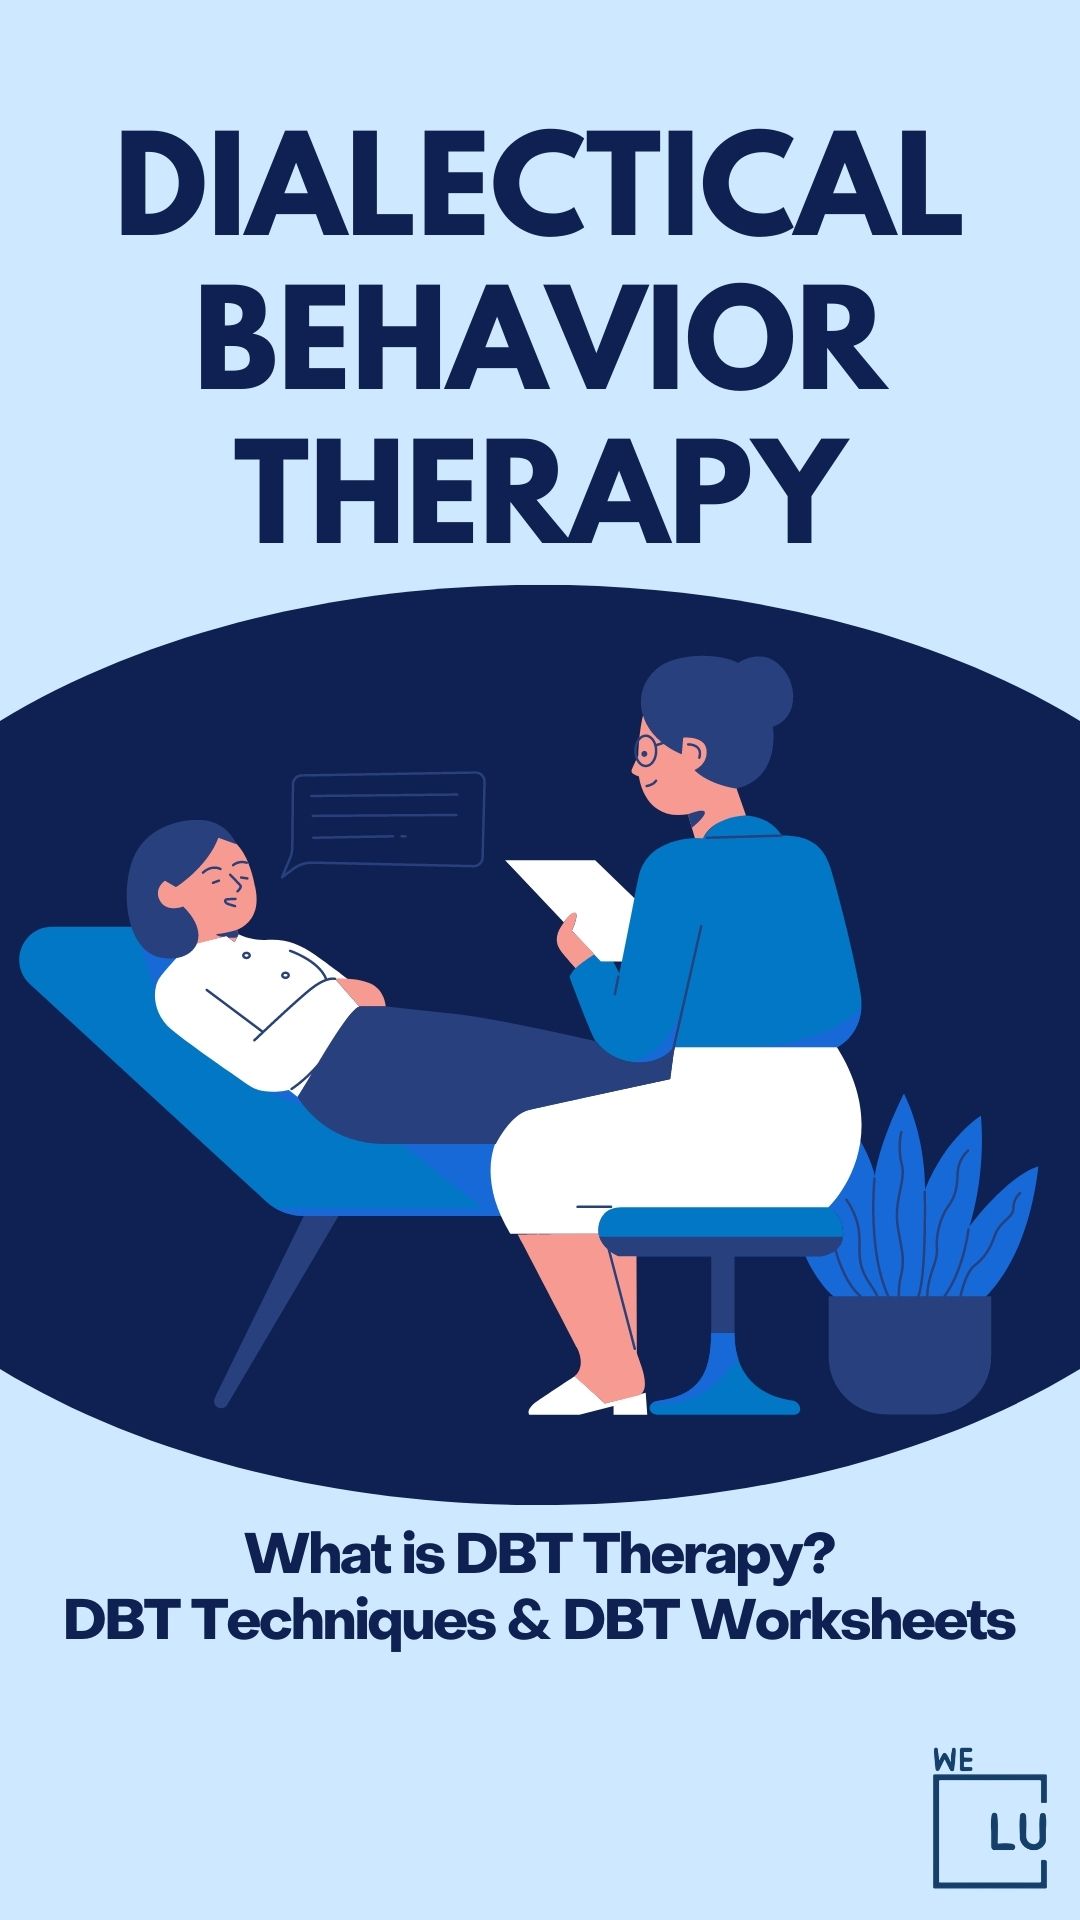 Dialectical Behavior Therapy. What is DBT Therapy, DBT Techniques & DBT Worksheets